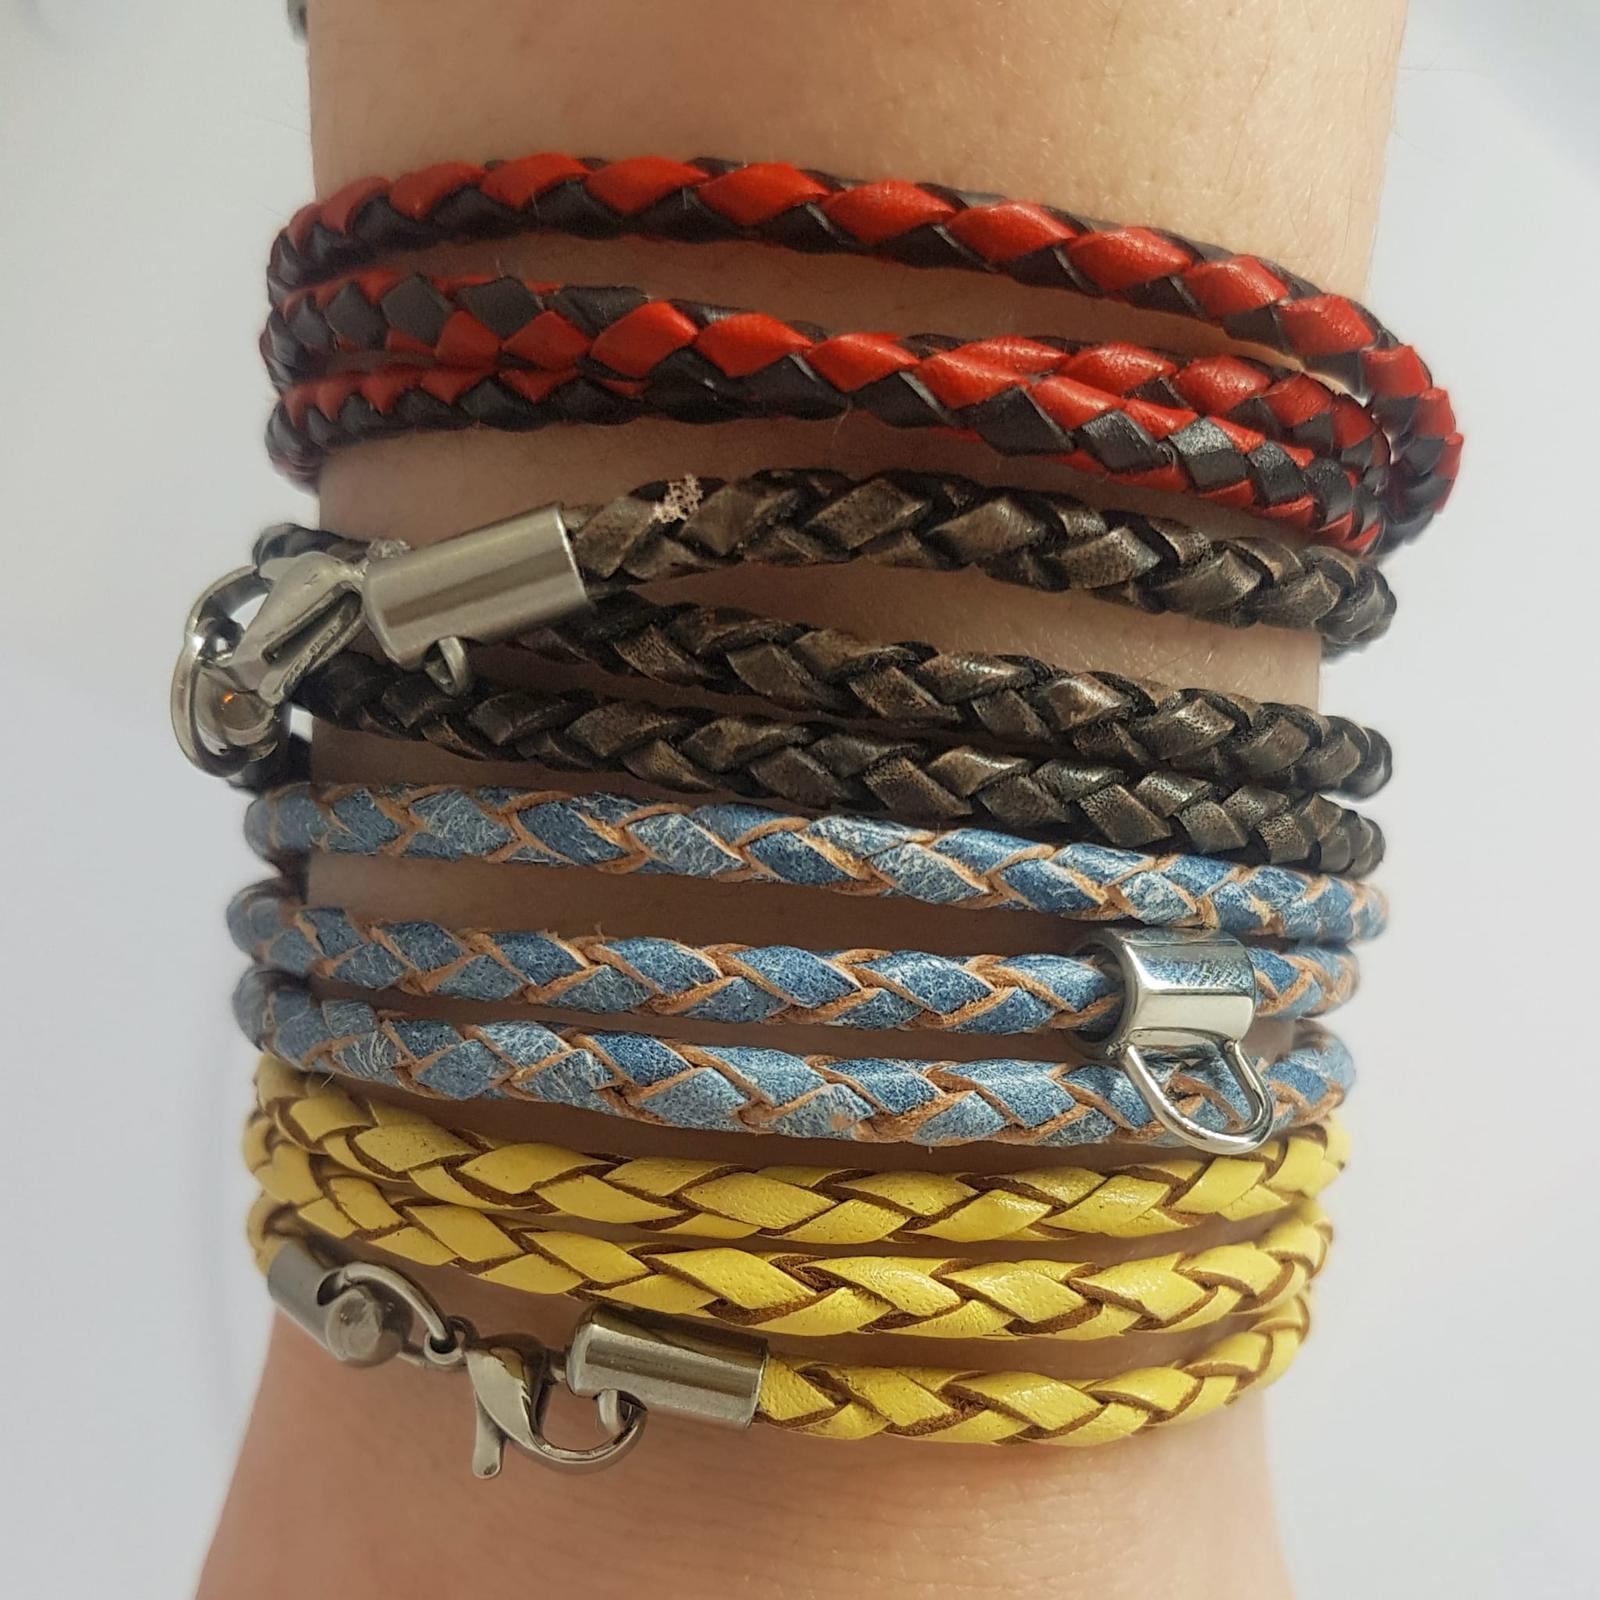 How do you make a round braided leather bracelet?